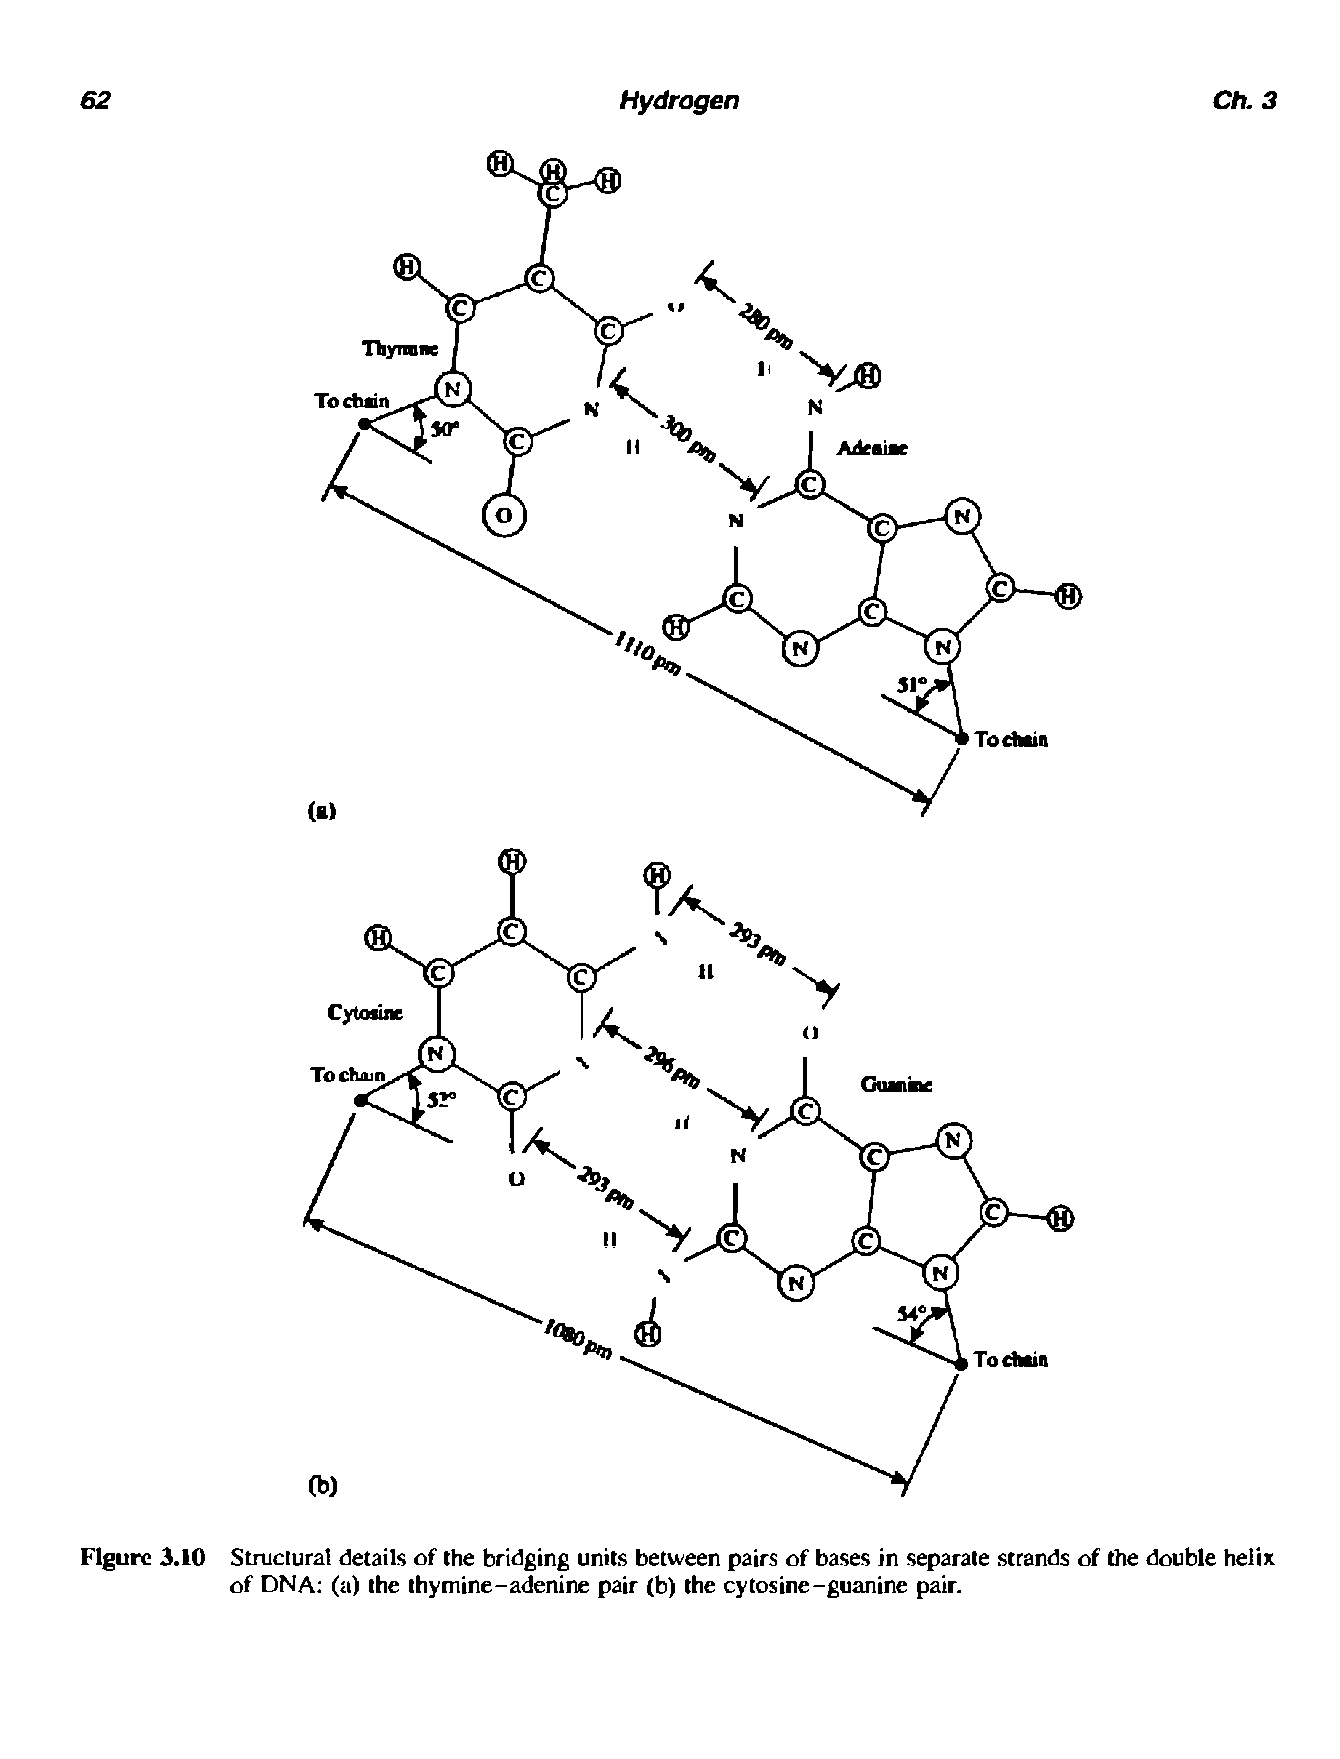 Figure 3.10 Stniciural details of the bridging units between pairs of bases in separate strands of the double helix of DNA (a) the thymine-adenine pair (b) the cytosine-guanine pair.